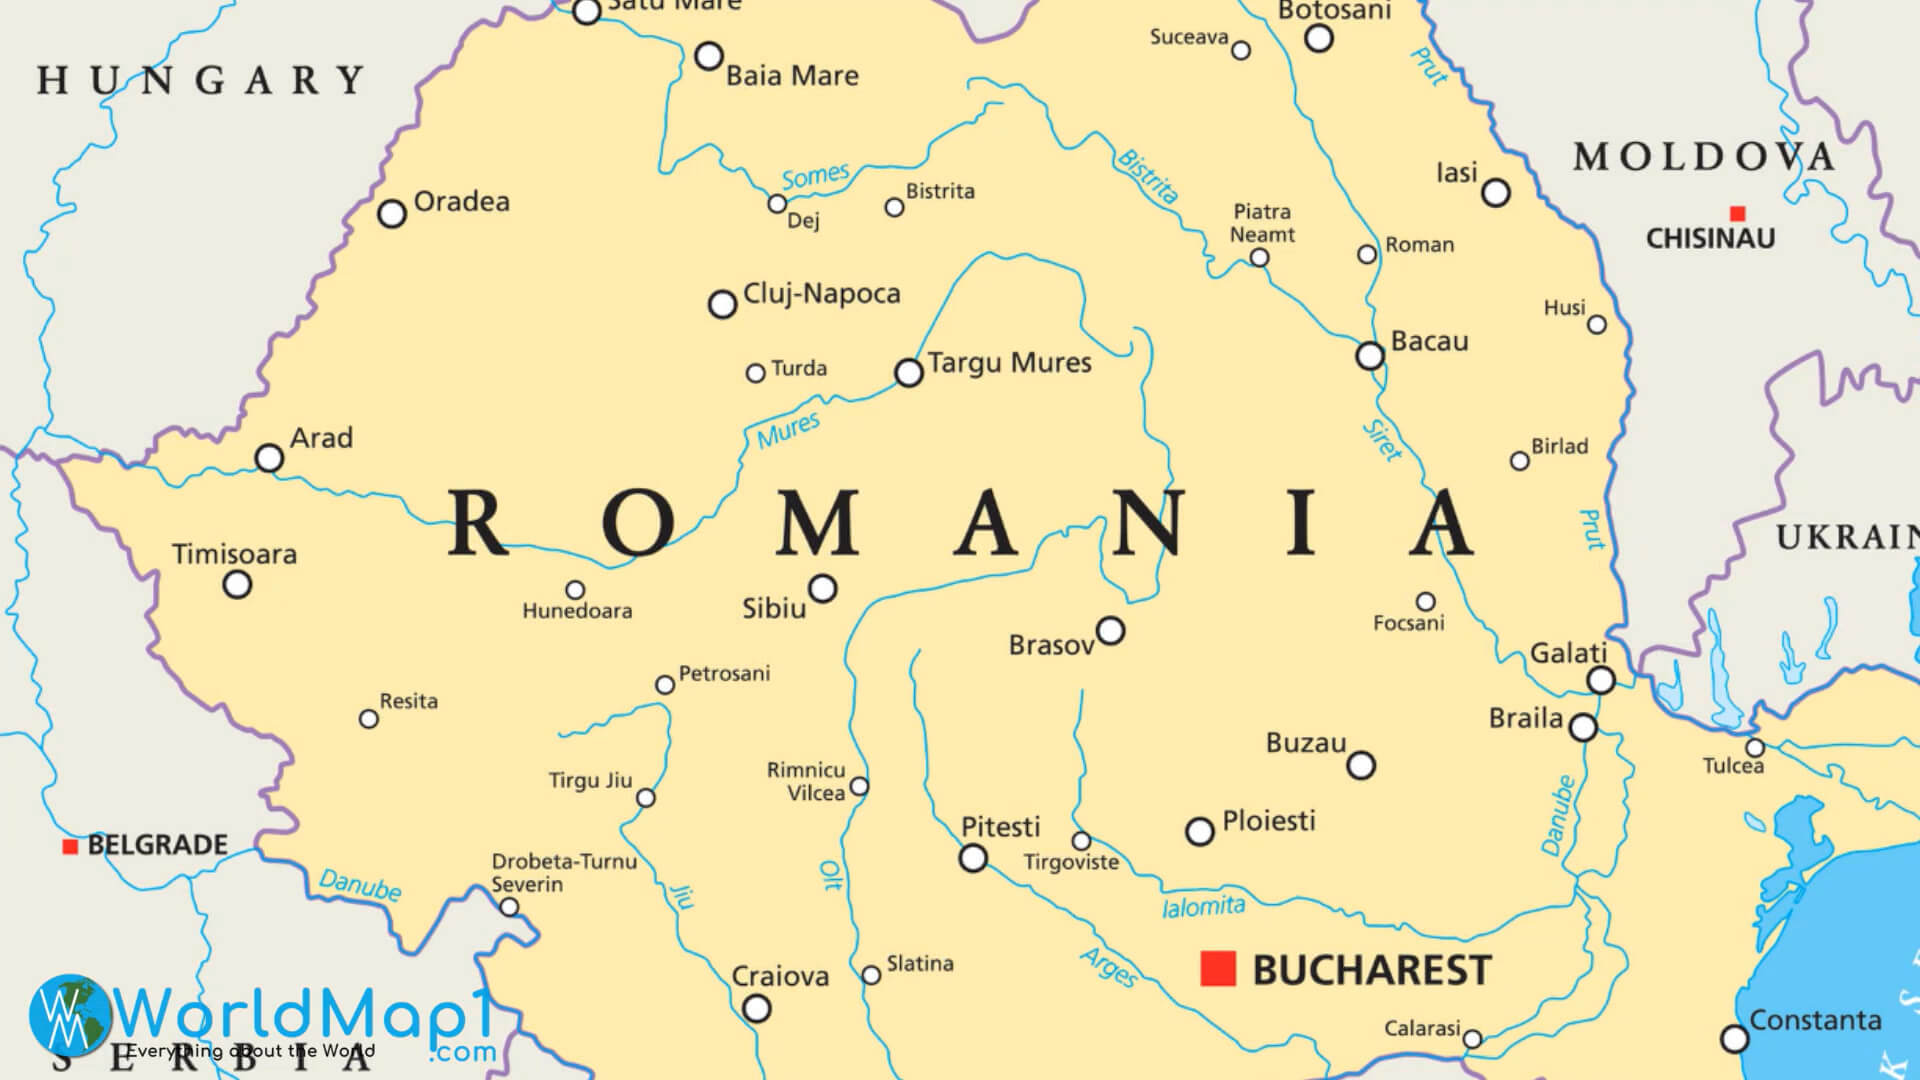 Romania Cities and Rivers Map